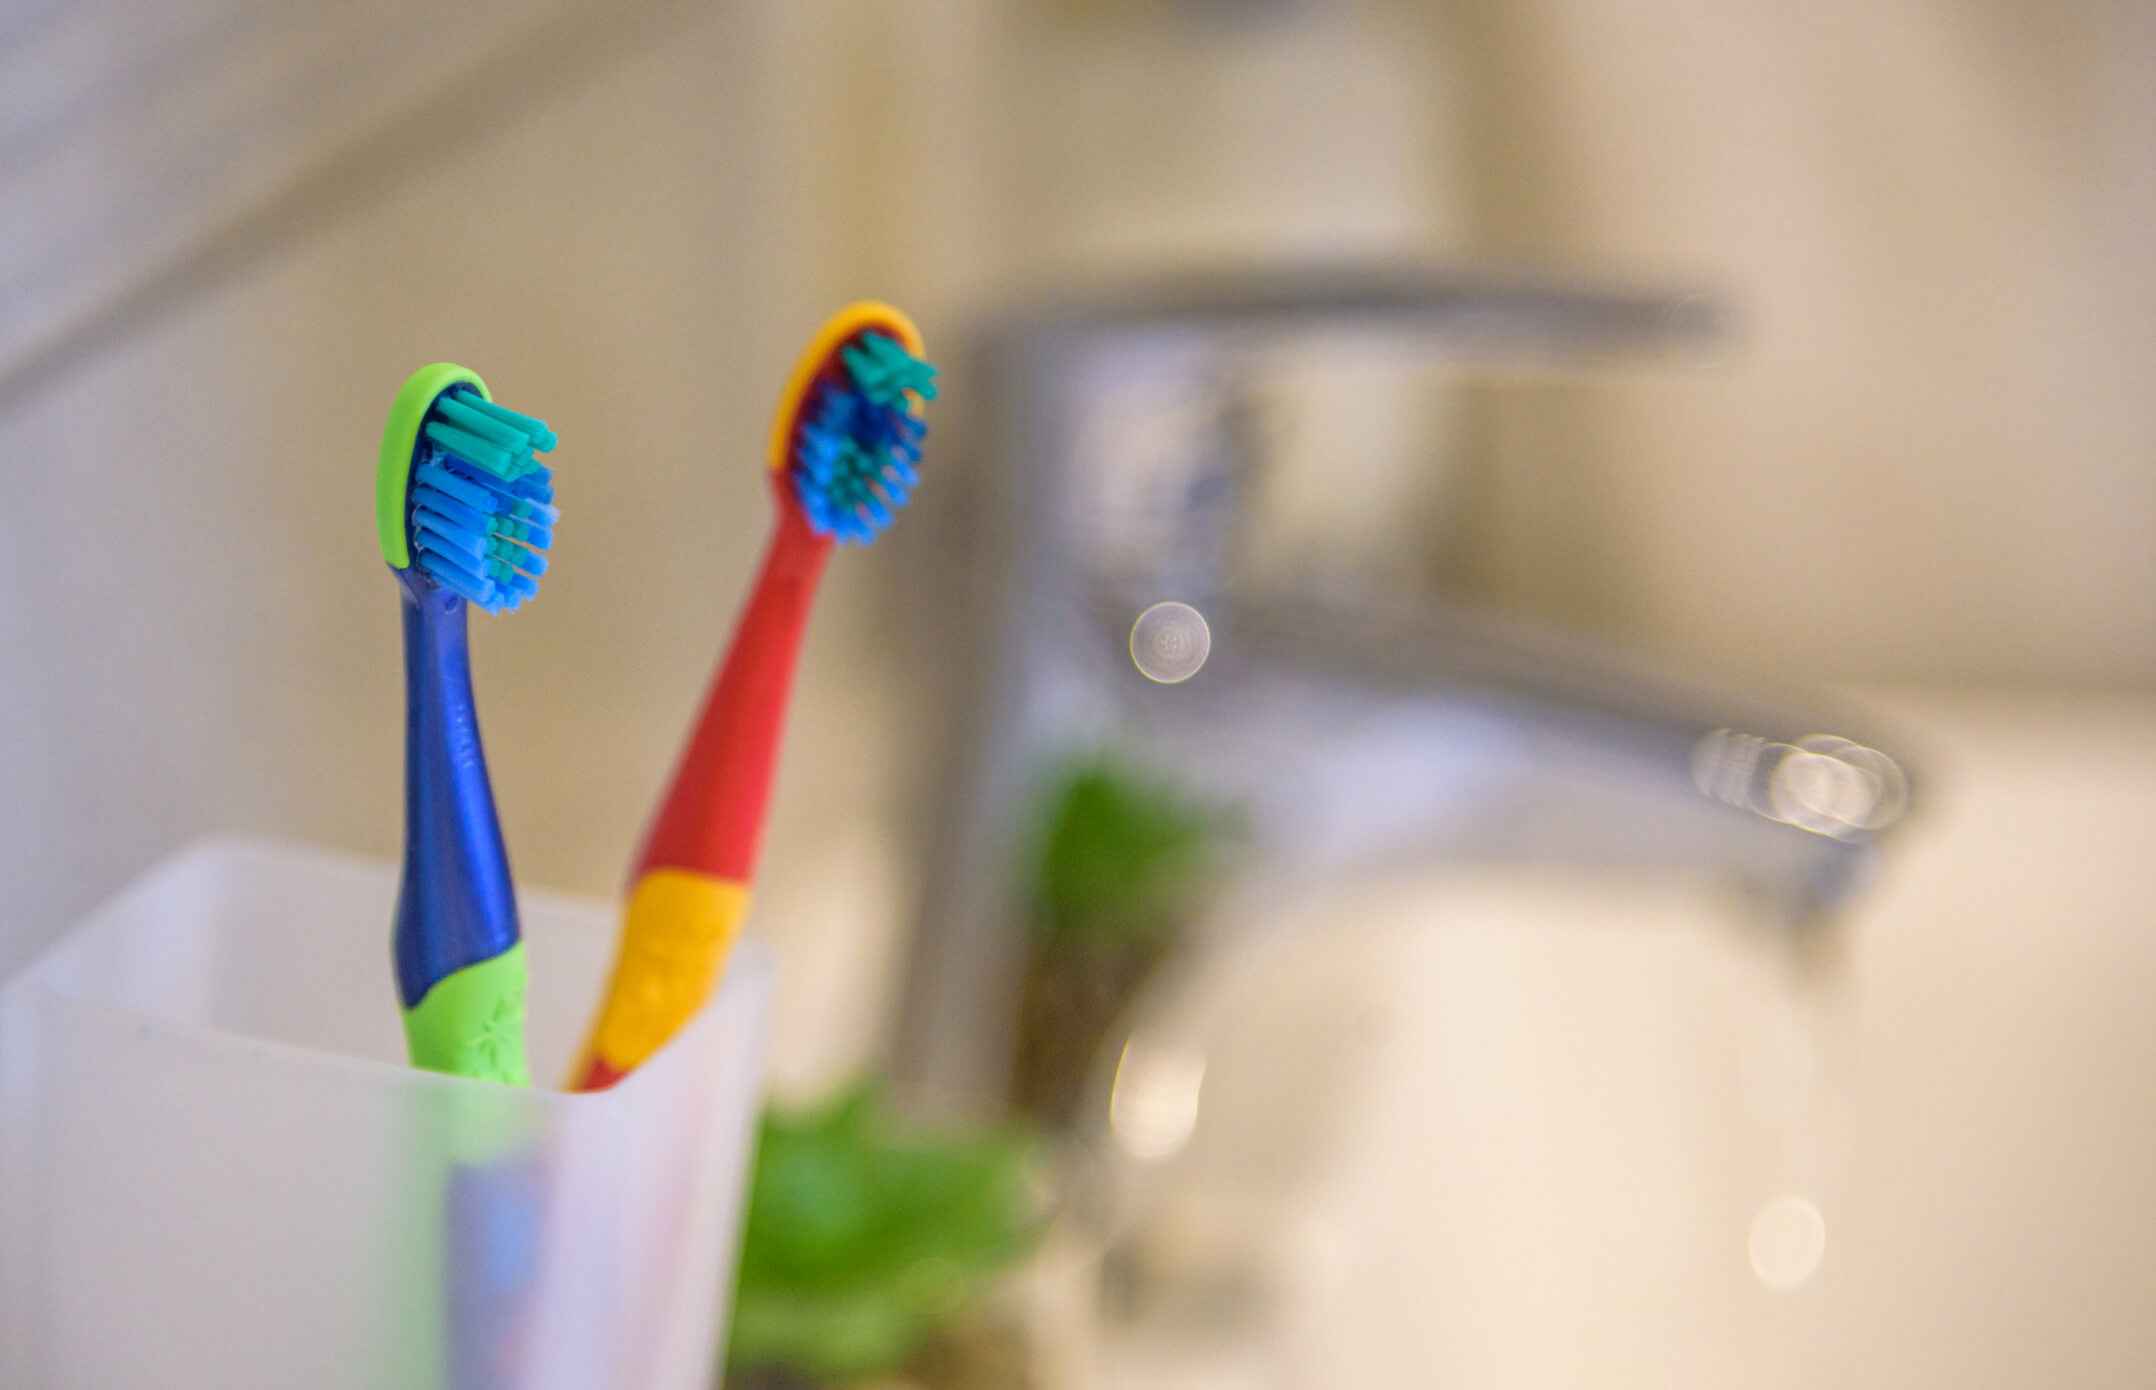 two toothbrushes on sink